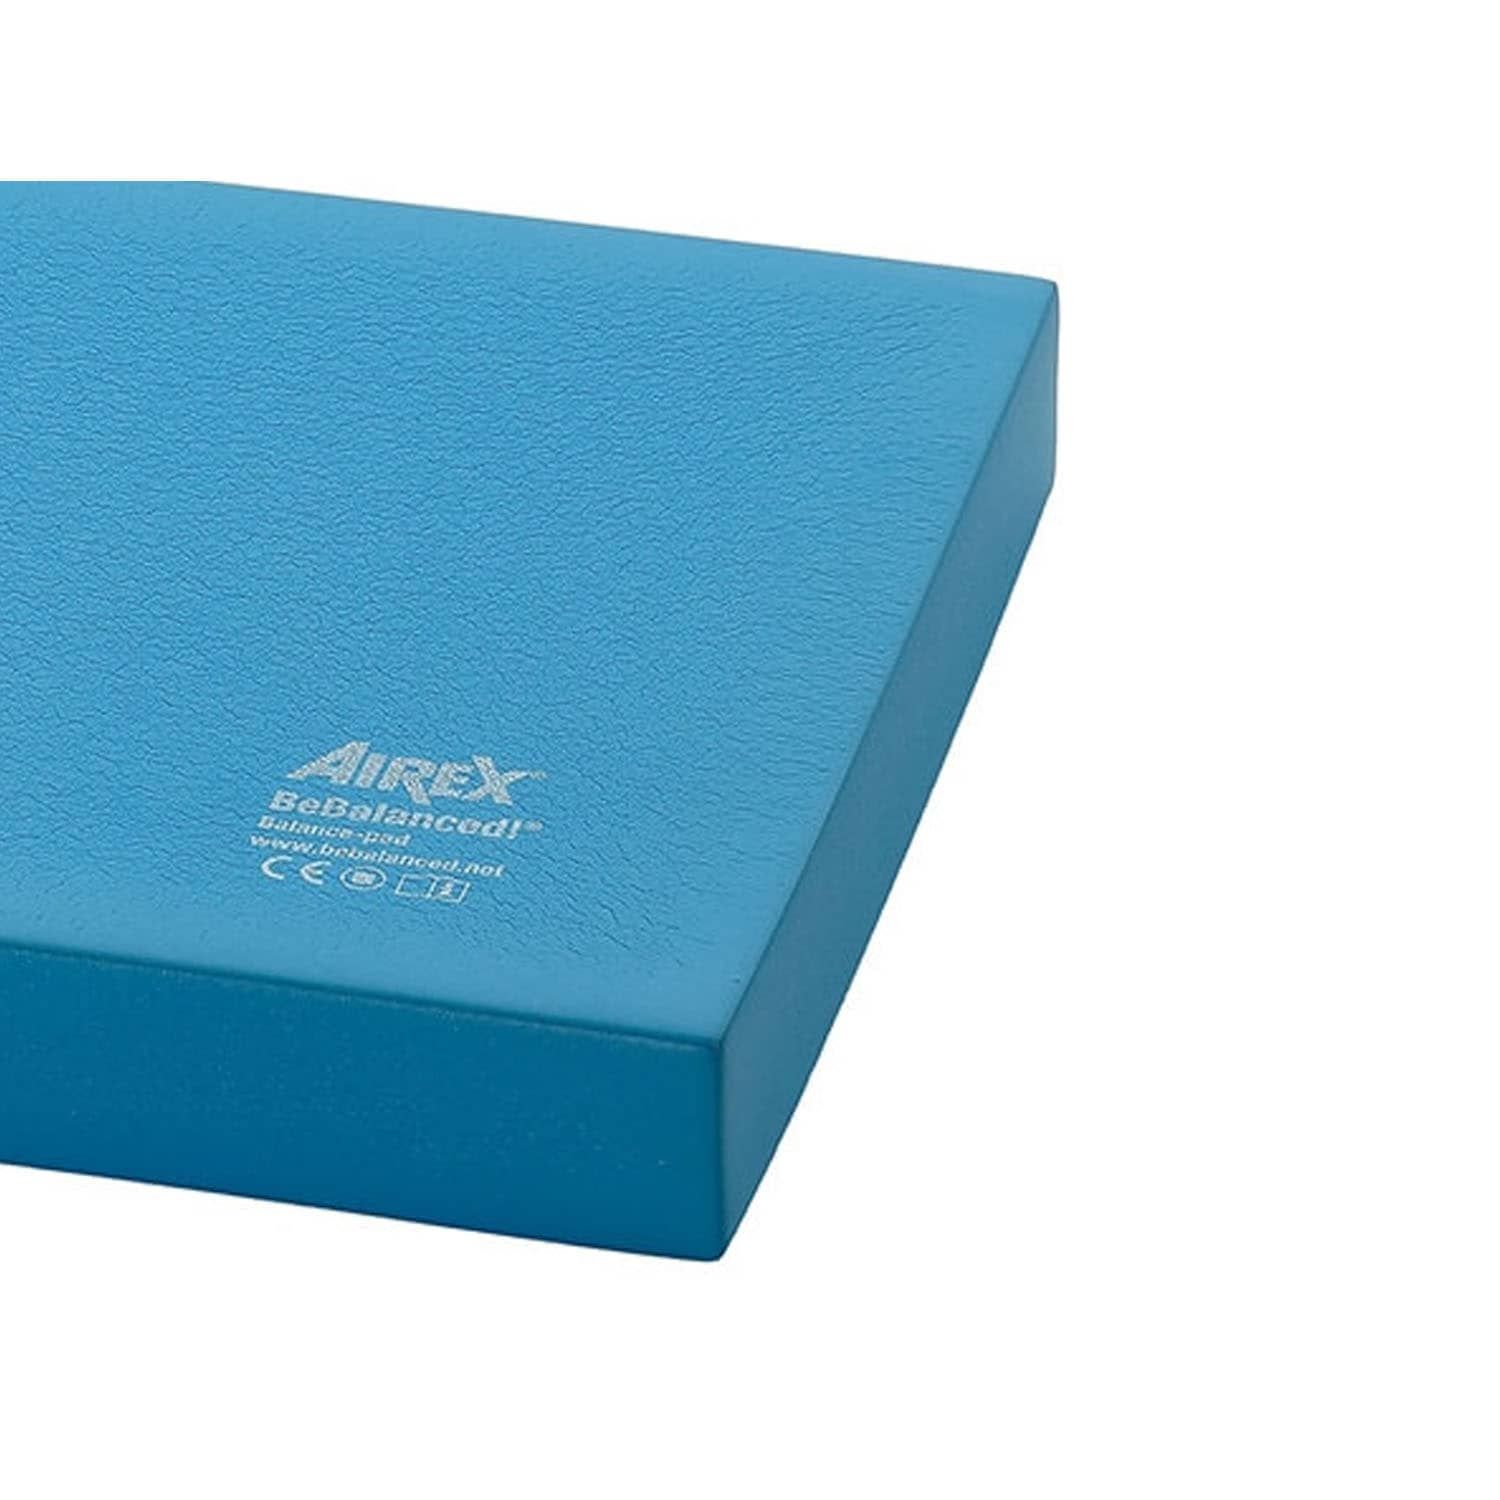 AIREX® Balance Pad XL | Power Systems